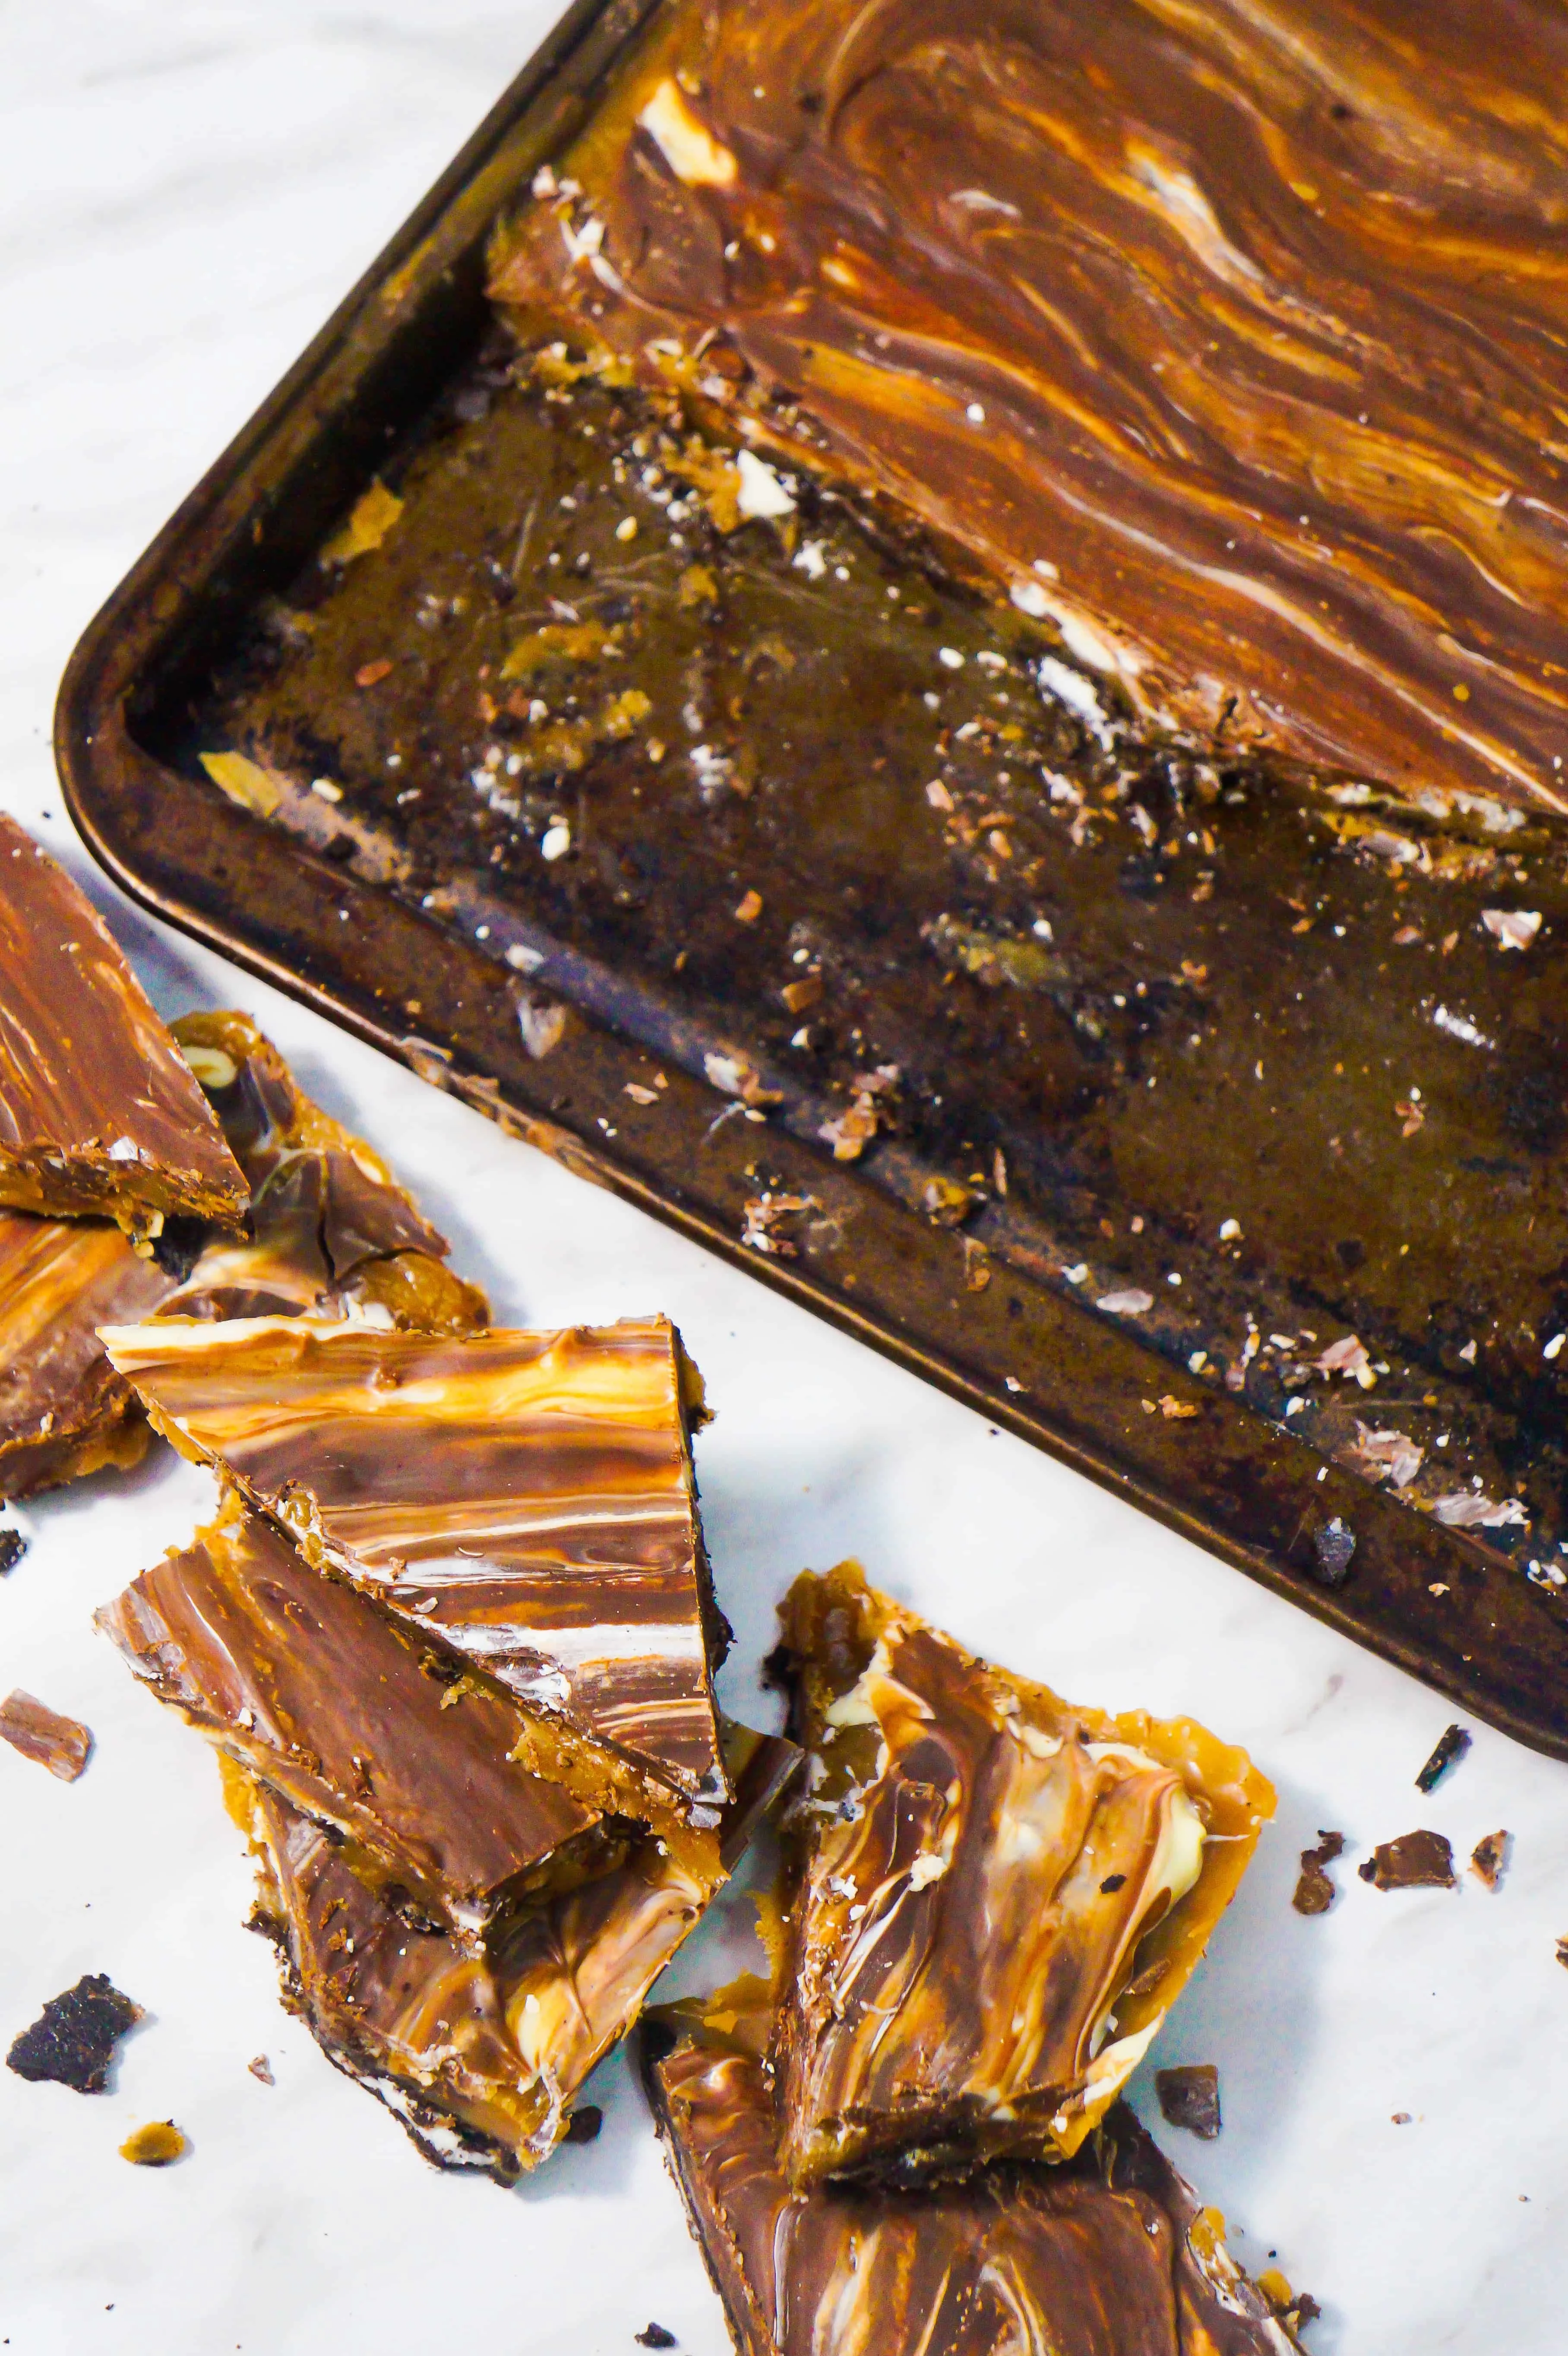 Chocolate Caramel Oreo Bars are an easy dessert recipe that taste just like Christmas Crack or toffee.